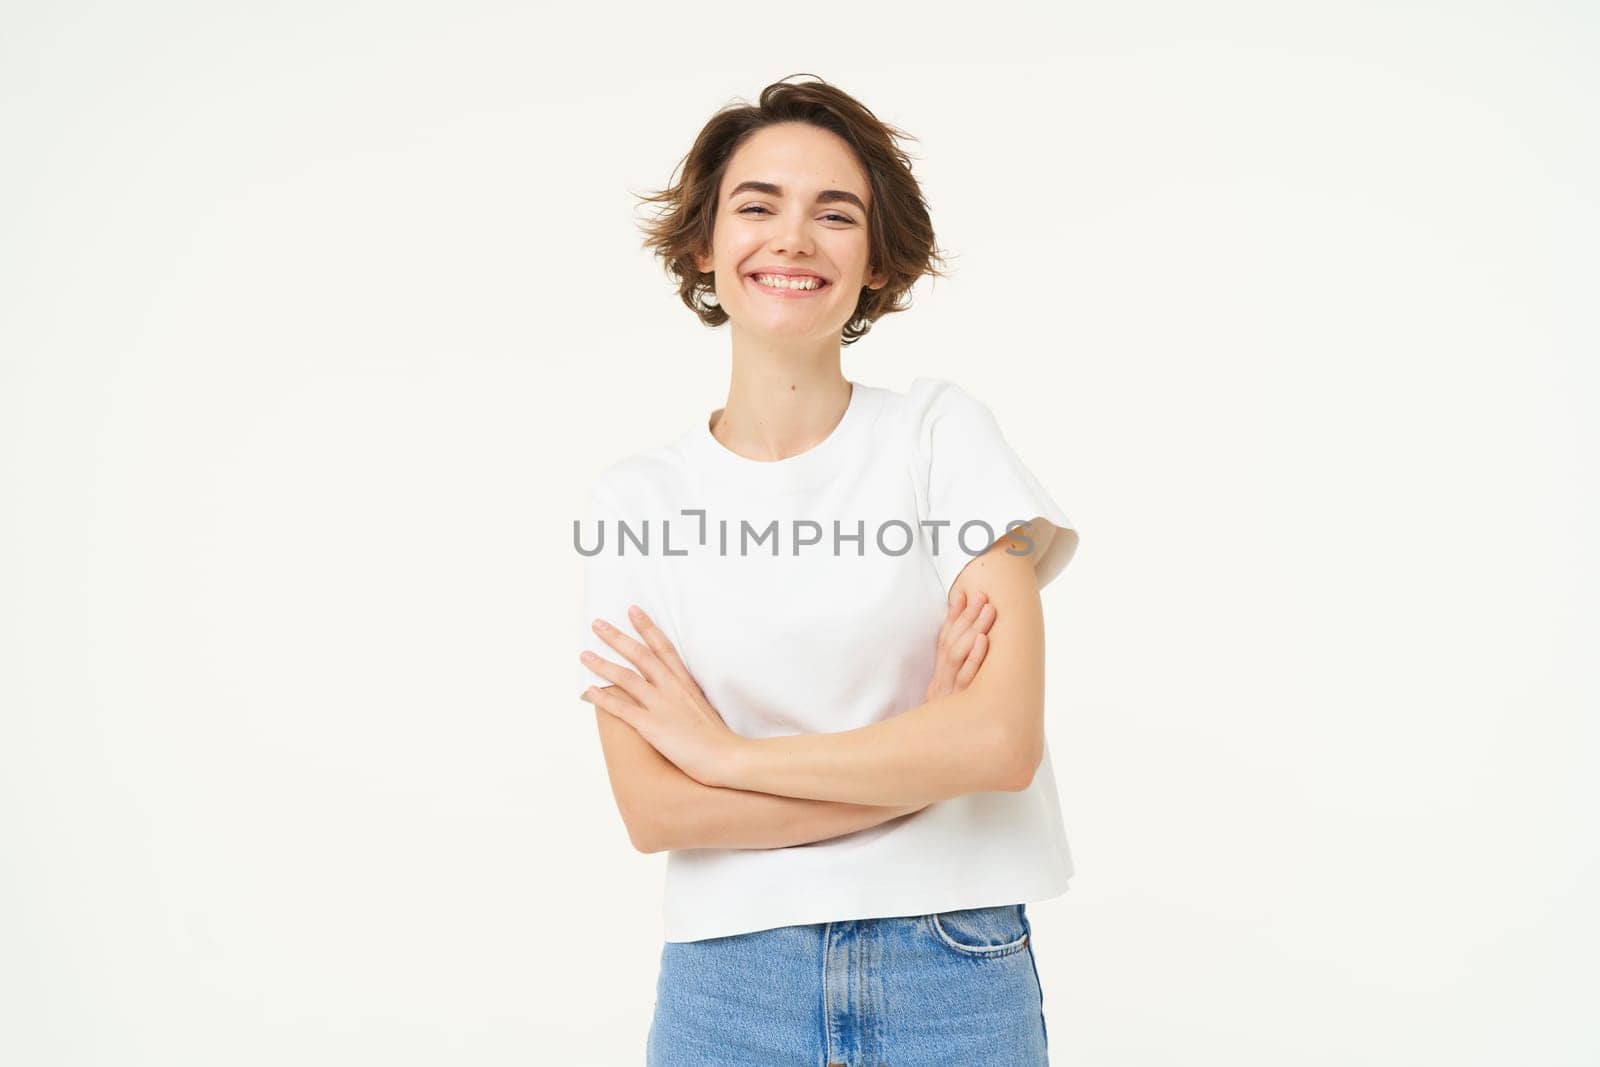 Portrait of cheerful woman laughing and smiling, cross arms on chest, standing in confident power pose, young professional concept, white studio background.